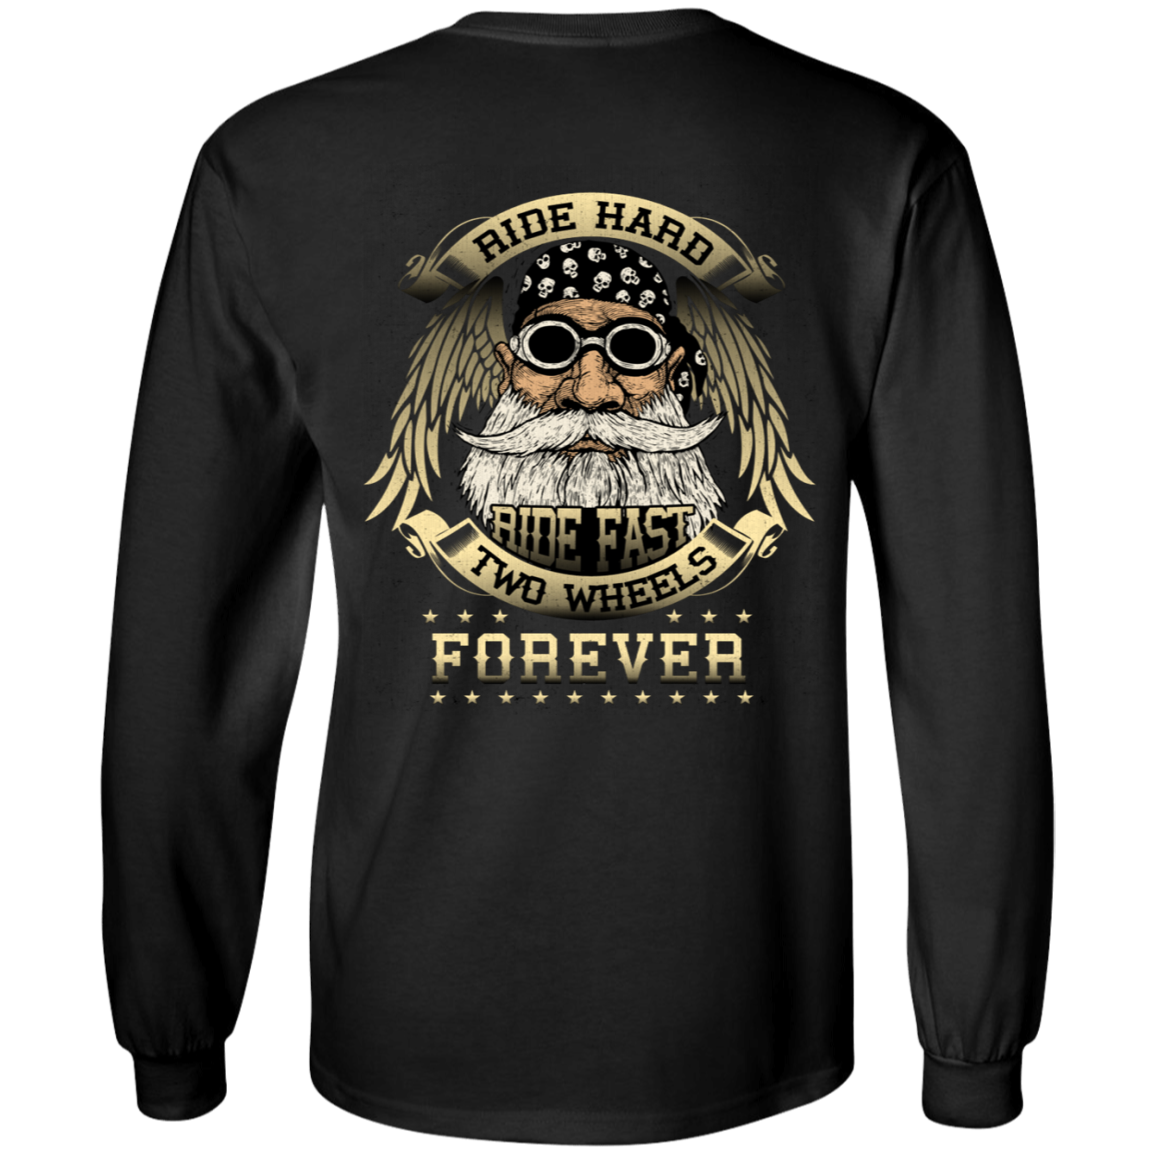 Two Wheels Forever Long Sleeves